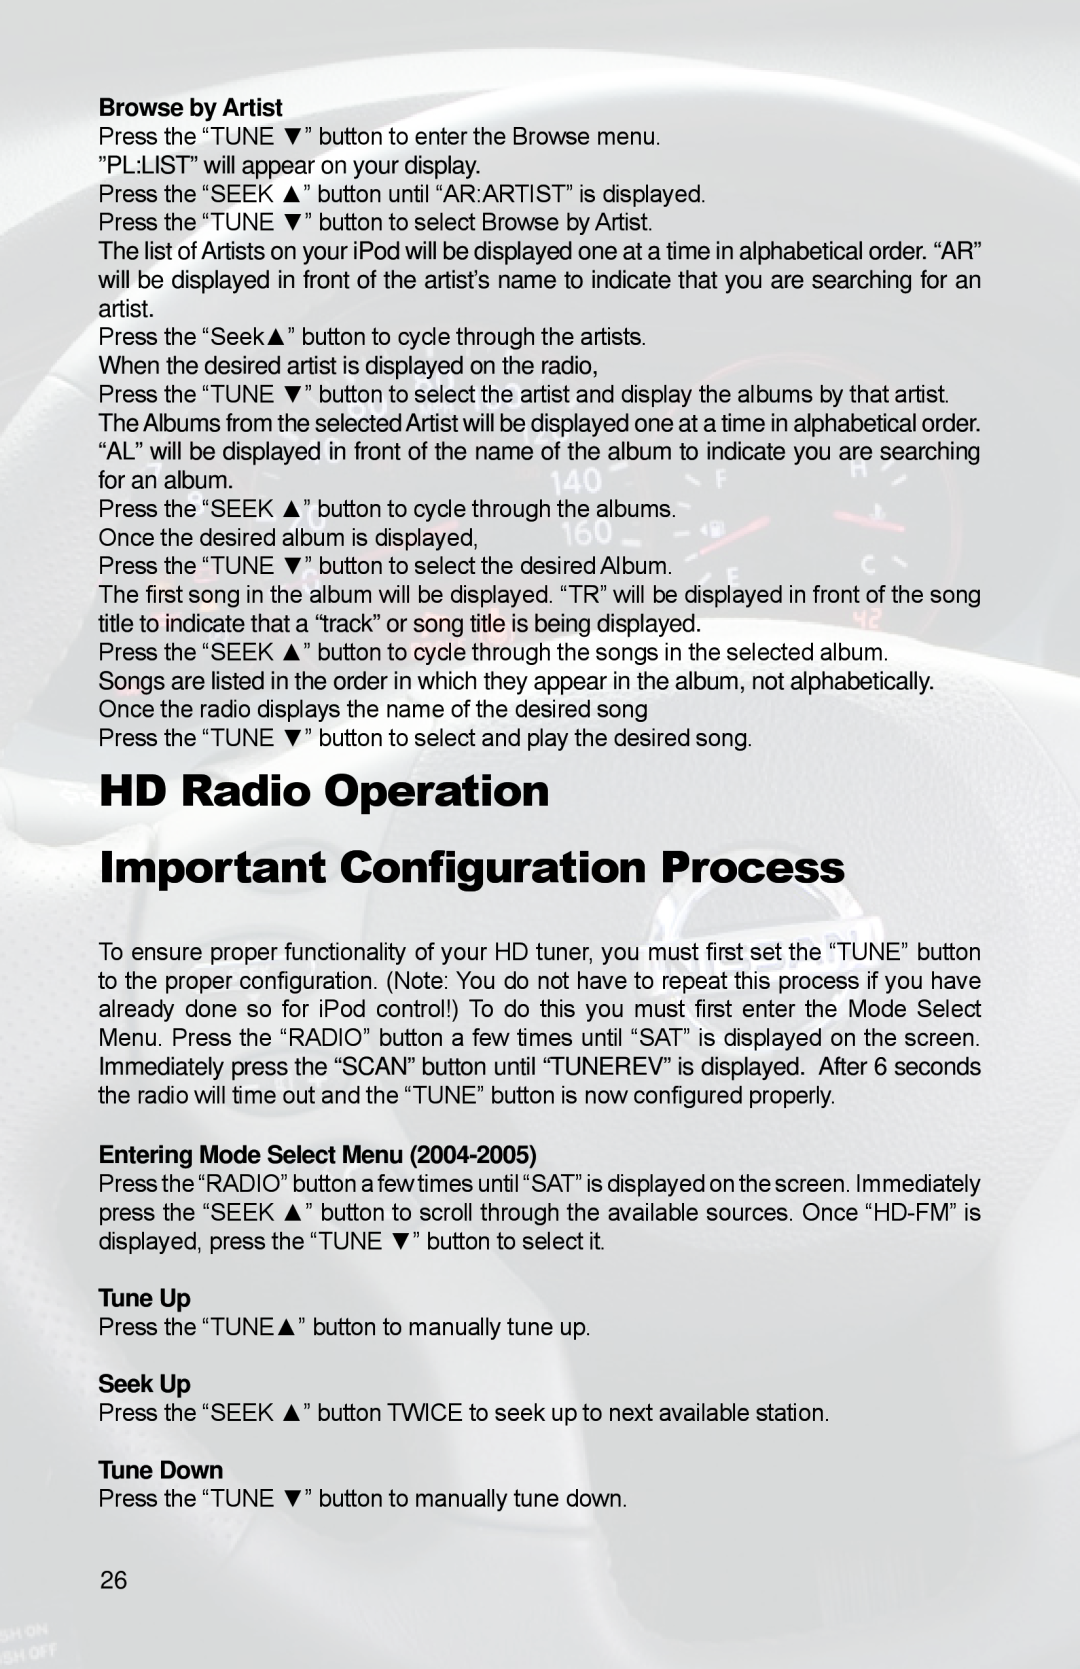 iSimple PGHNI2 HD Radio Operation, Important Configuration Process, When the desired artist is displayed on the radio 